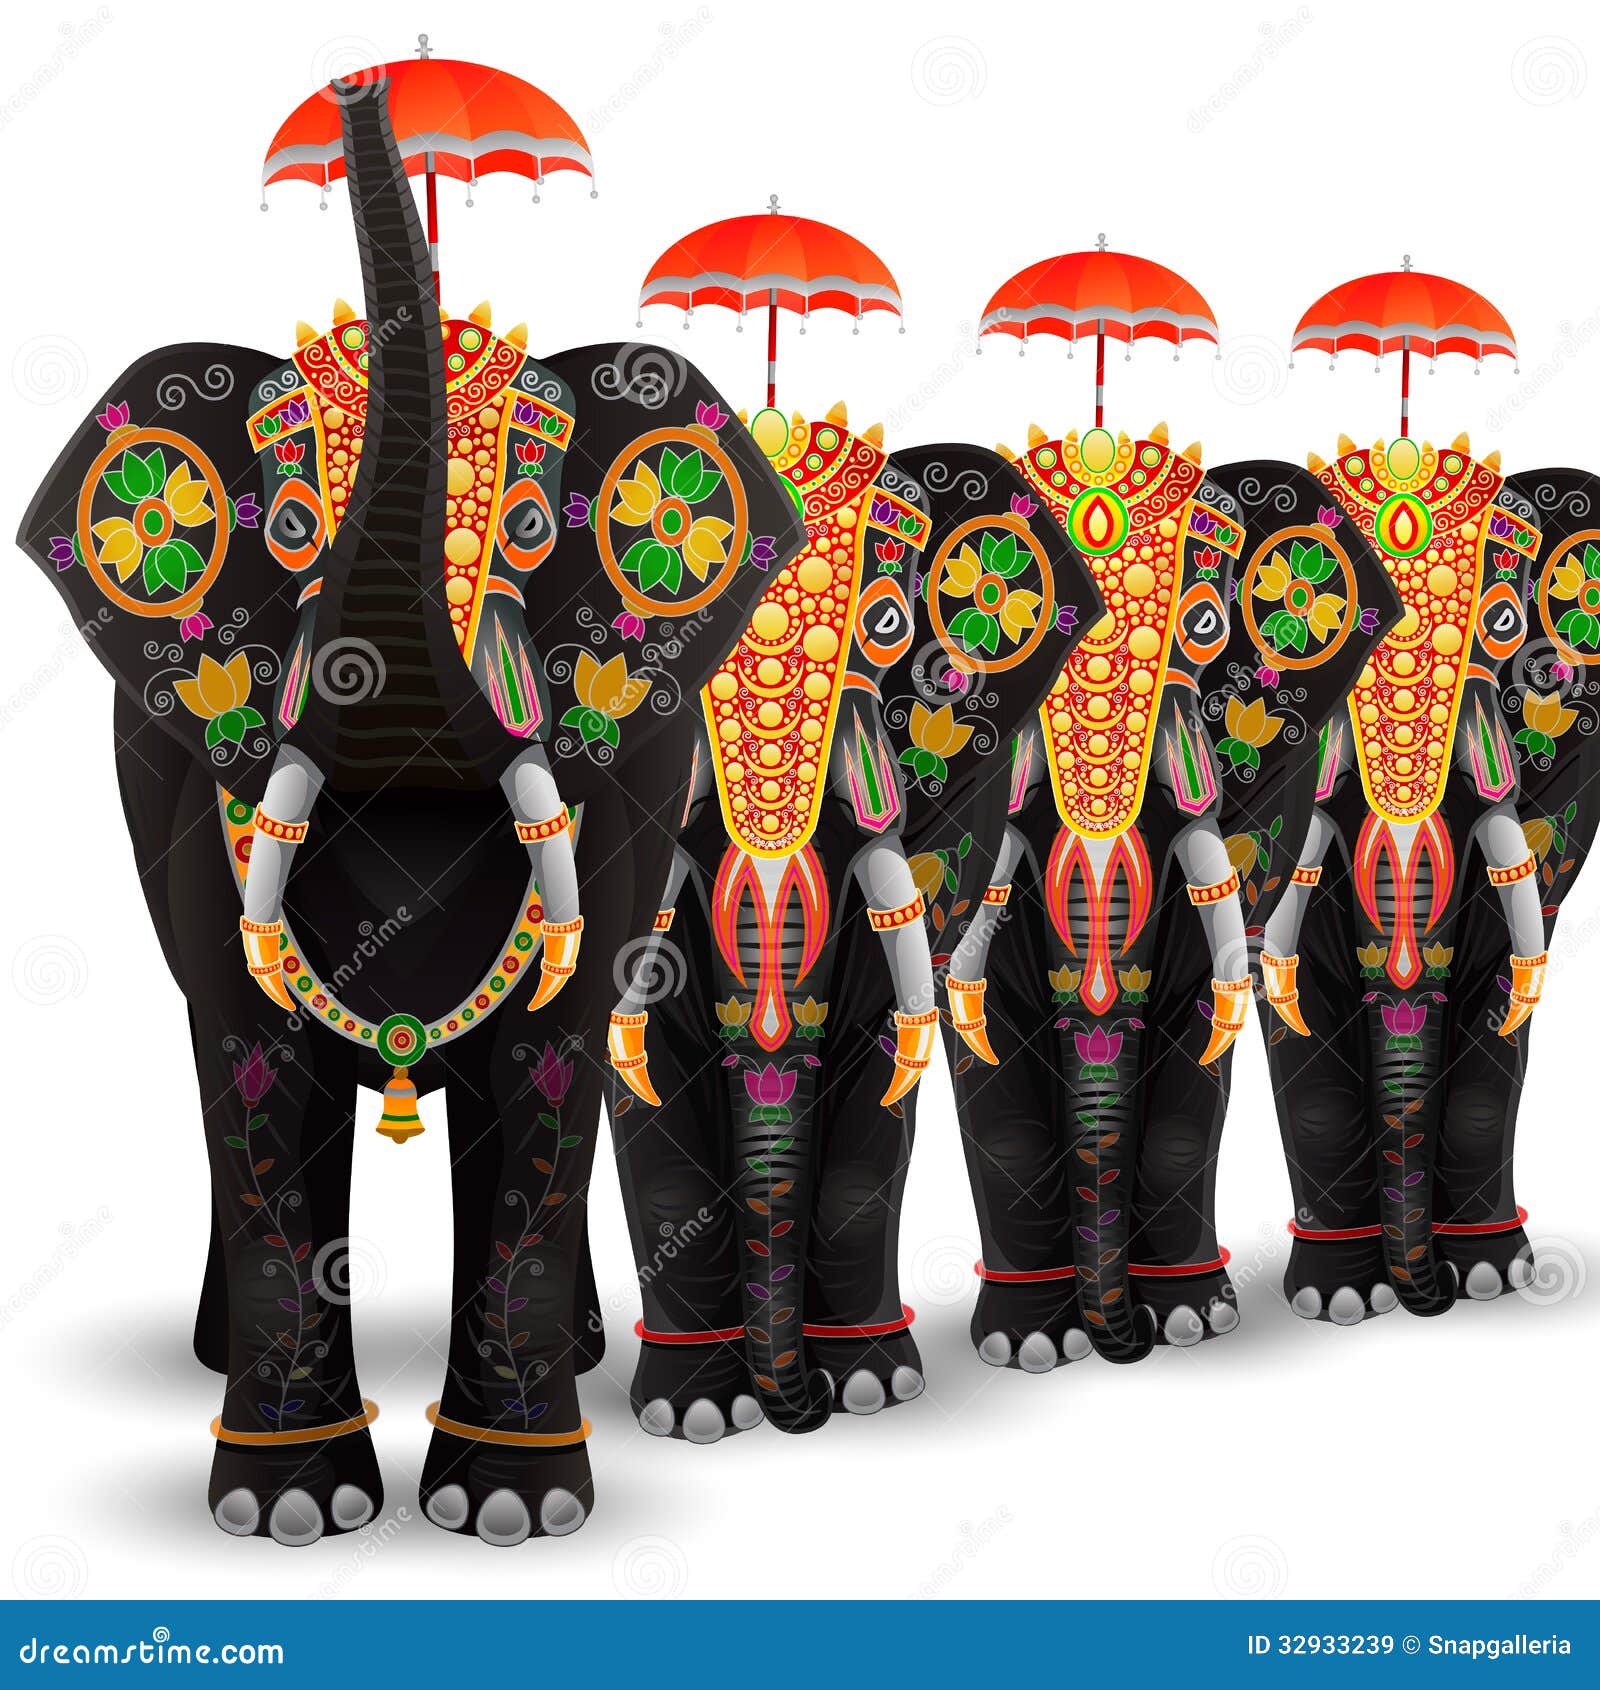 Decorated Elephant Of South India Royalty Free Stock ...